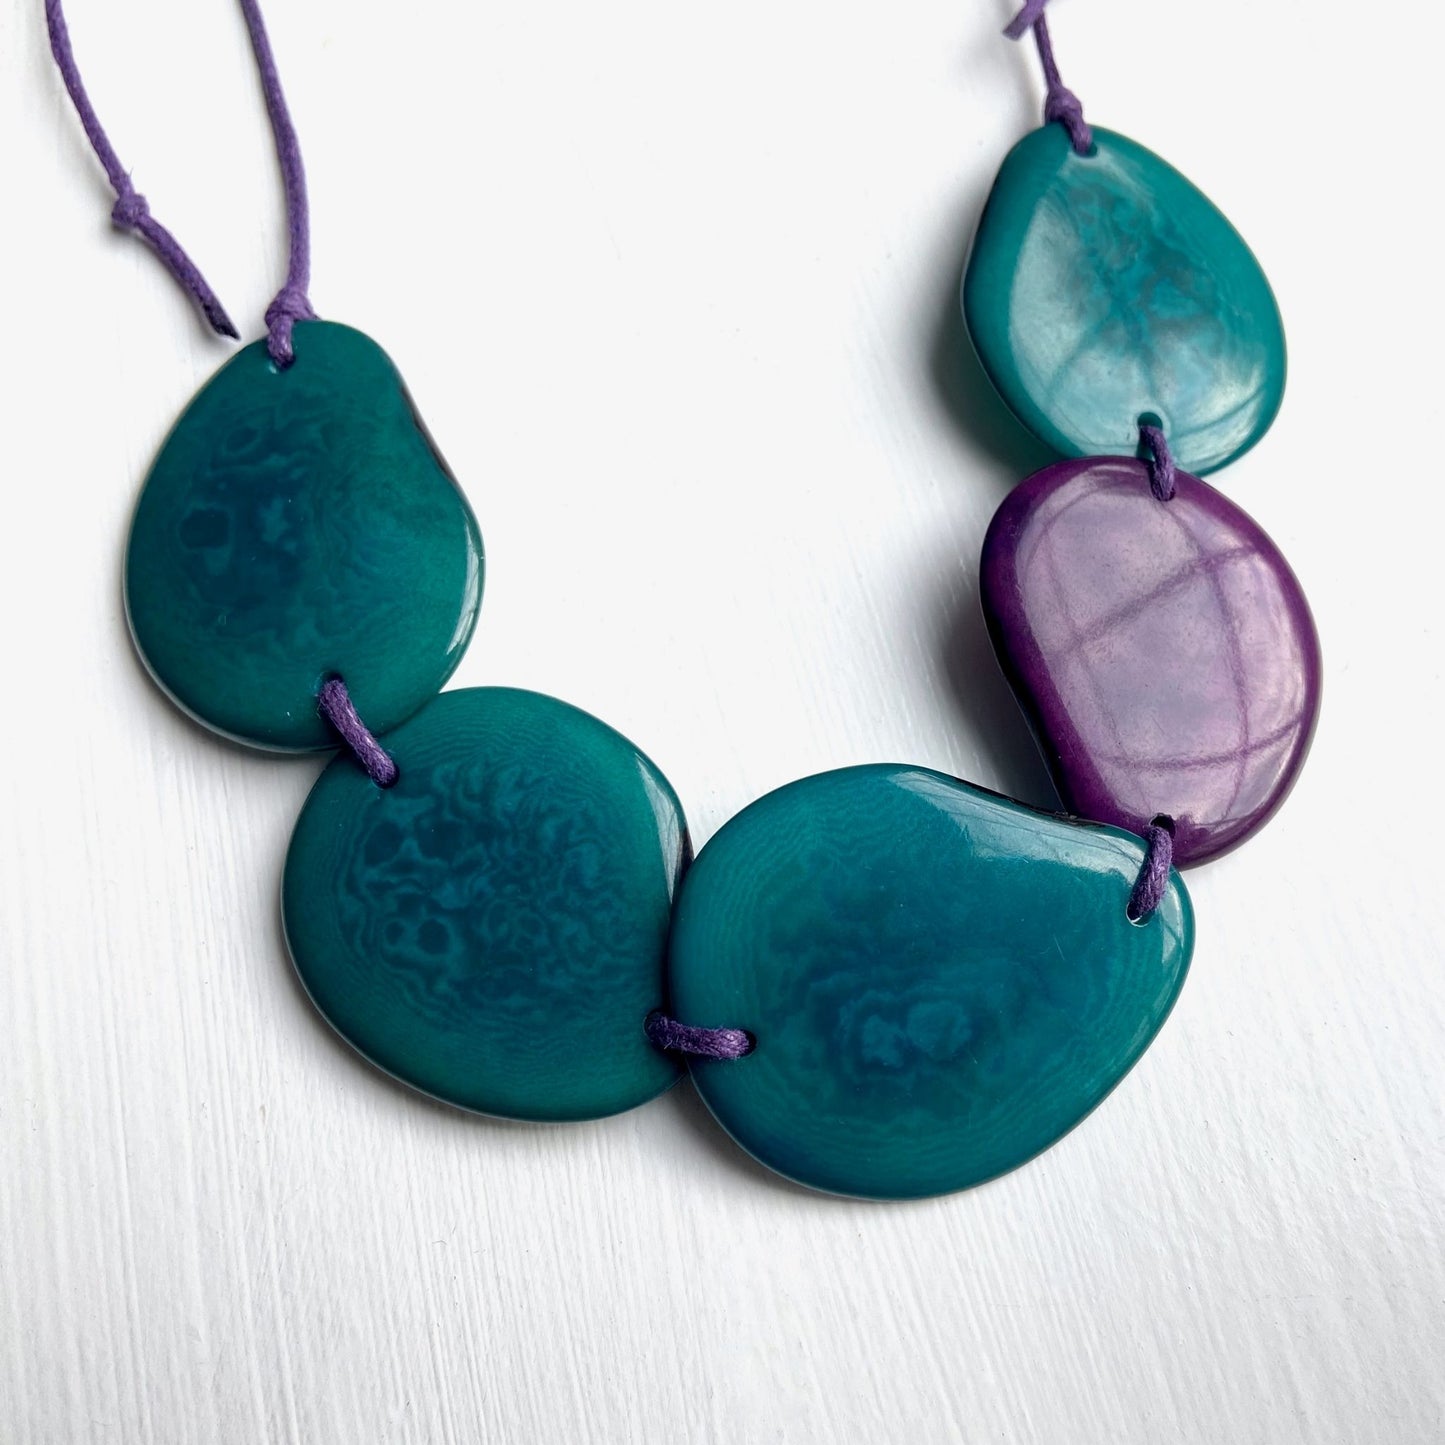 Ethical & Handmade Necklace - purple and teal bead close up